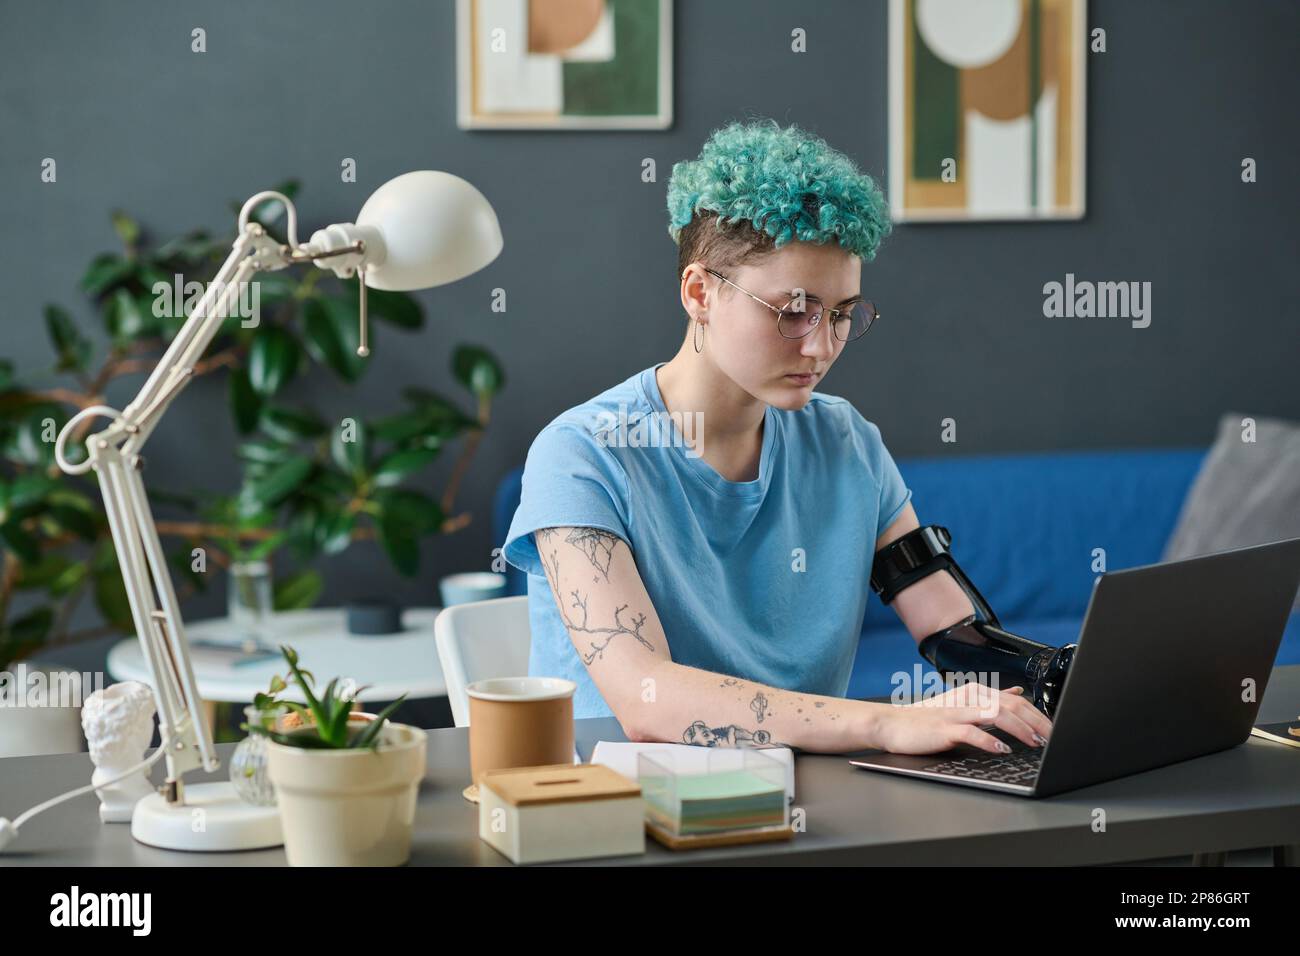 Young woman with prosthetic arm typing on laptop doing her online work at home Stock Photo